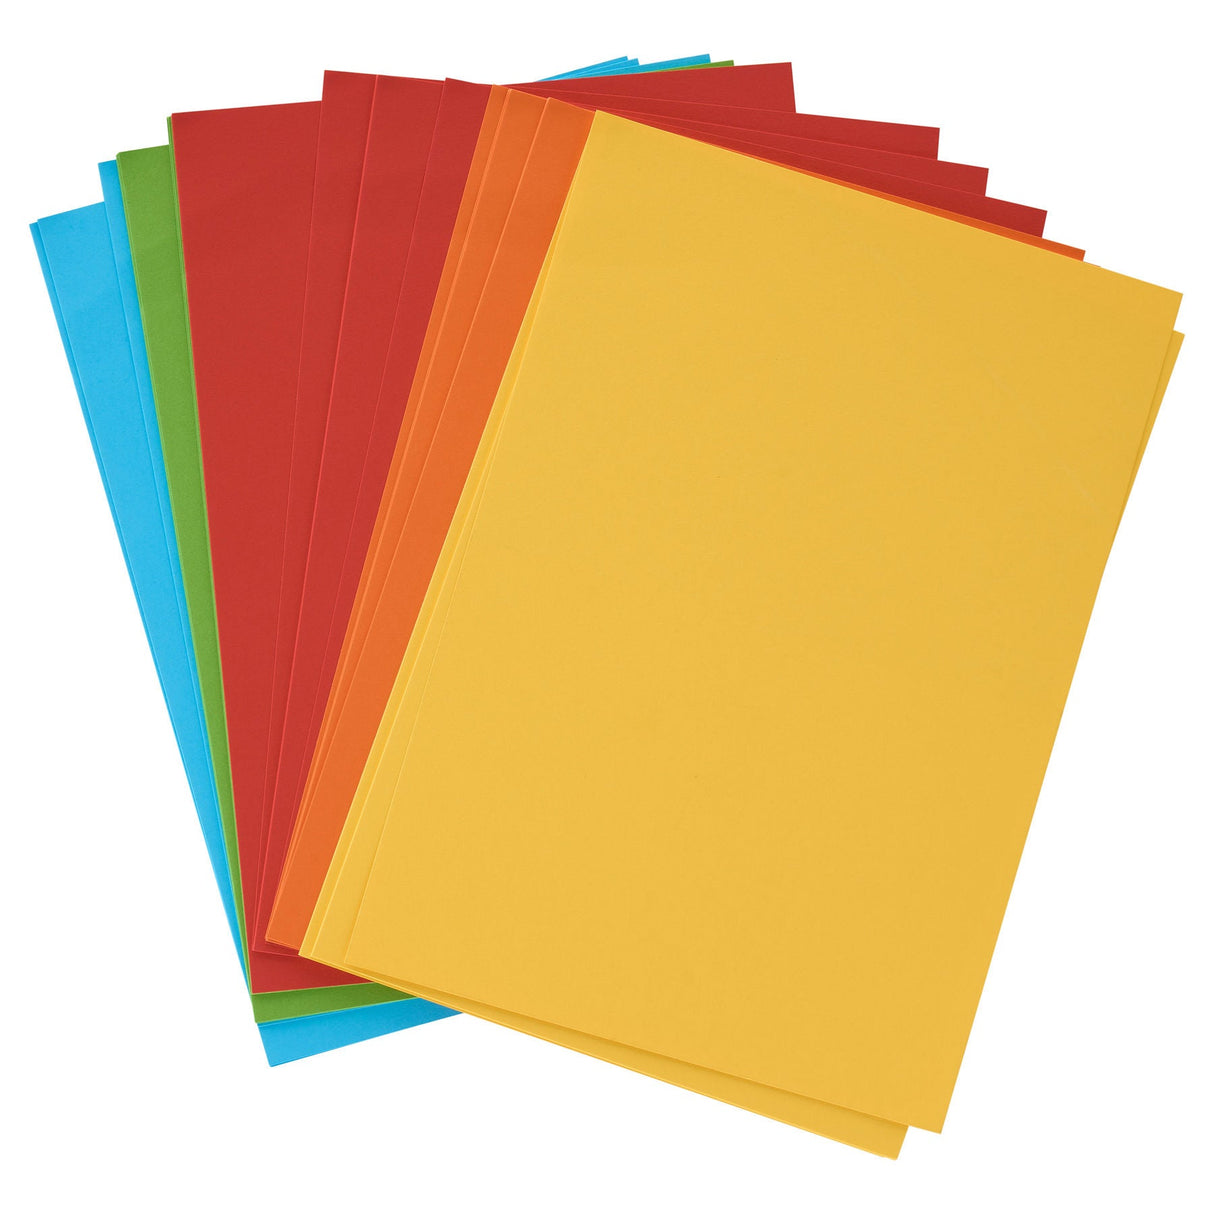 Premier Activity A4 Card - 160 gsm - Rainbow - 50 Sheets | Stationery Shop UK